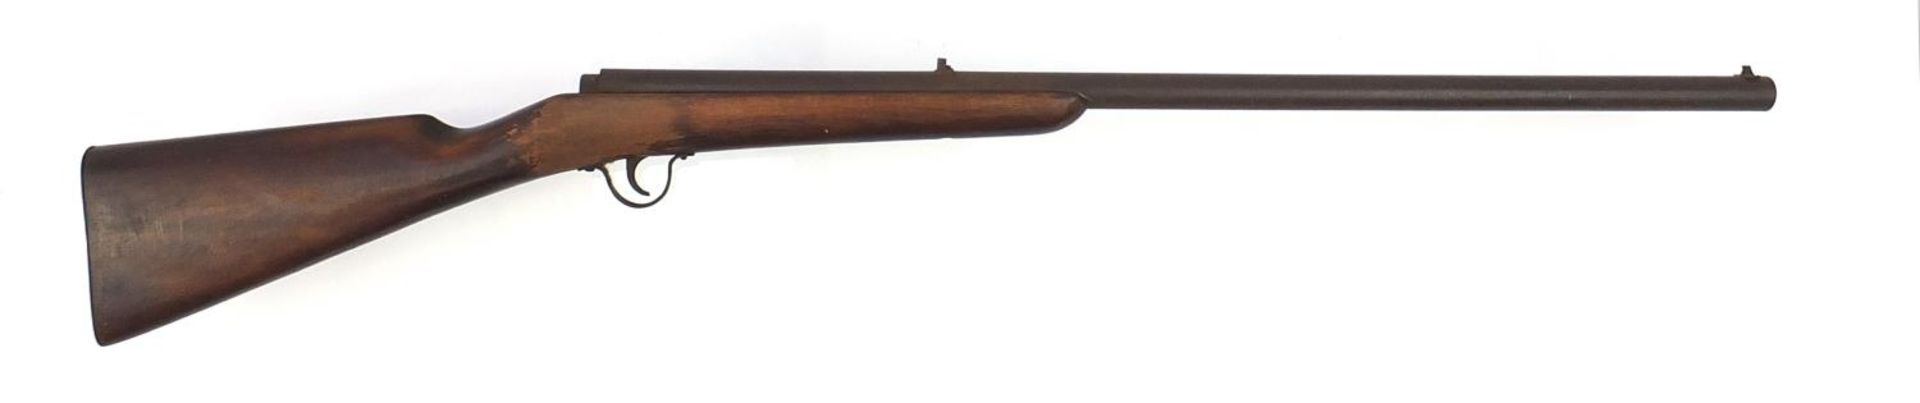 Vintage Flash Spotter blank rifle, 105cm in length :For Further Condition Reports Please Visit Our